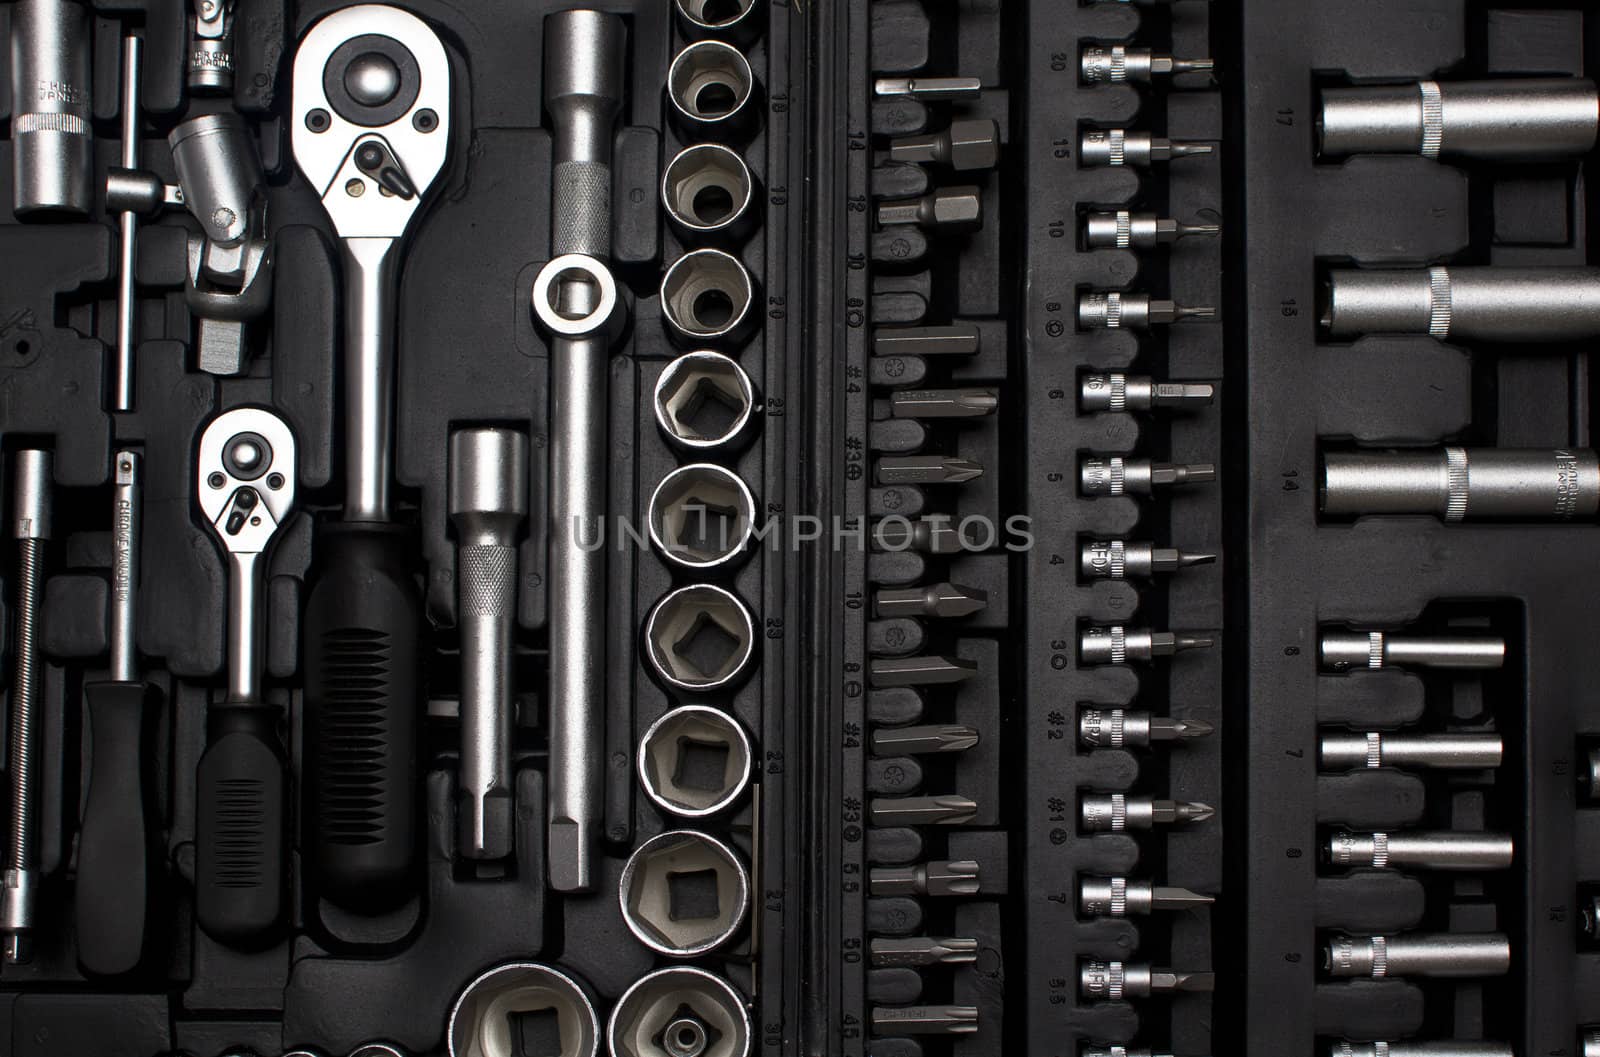 Set of tools on a white background by Lexxizm